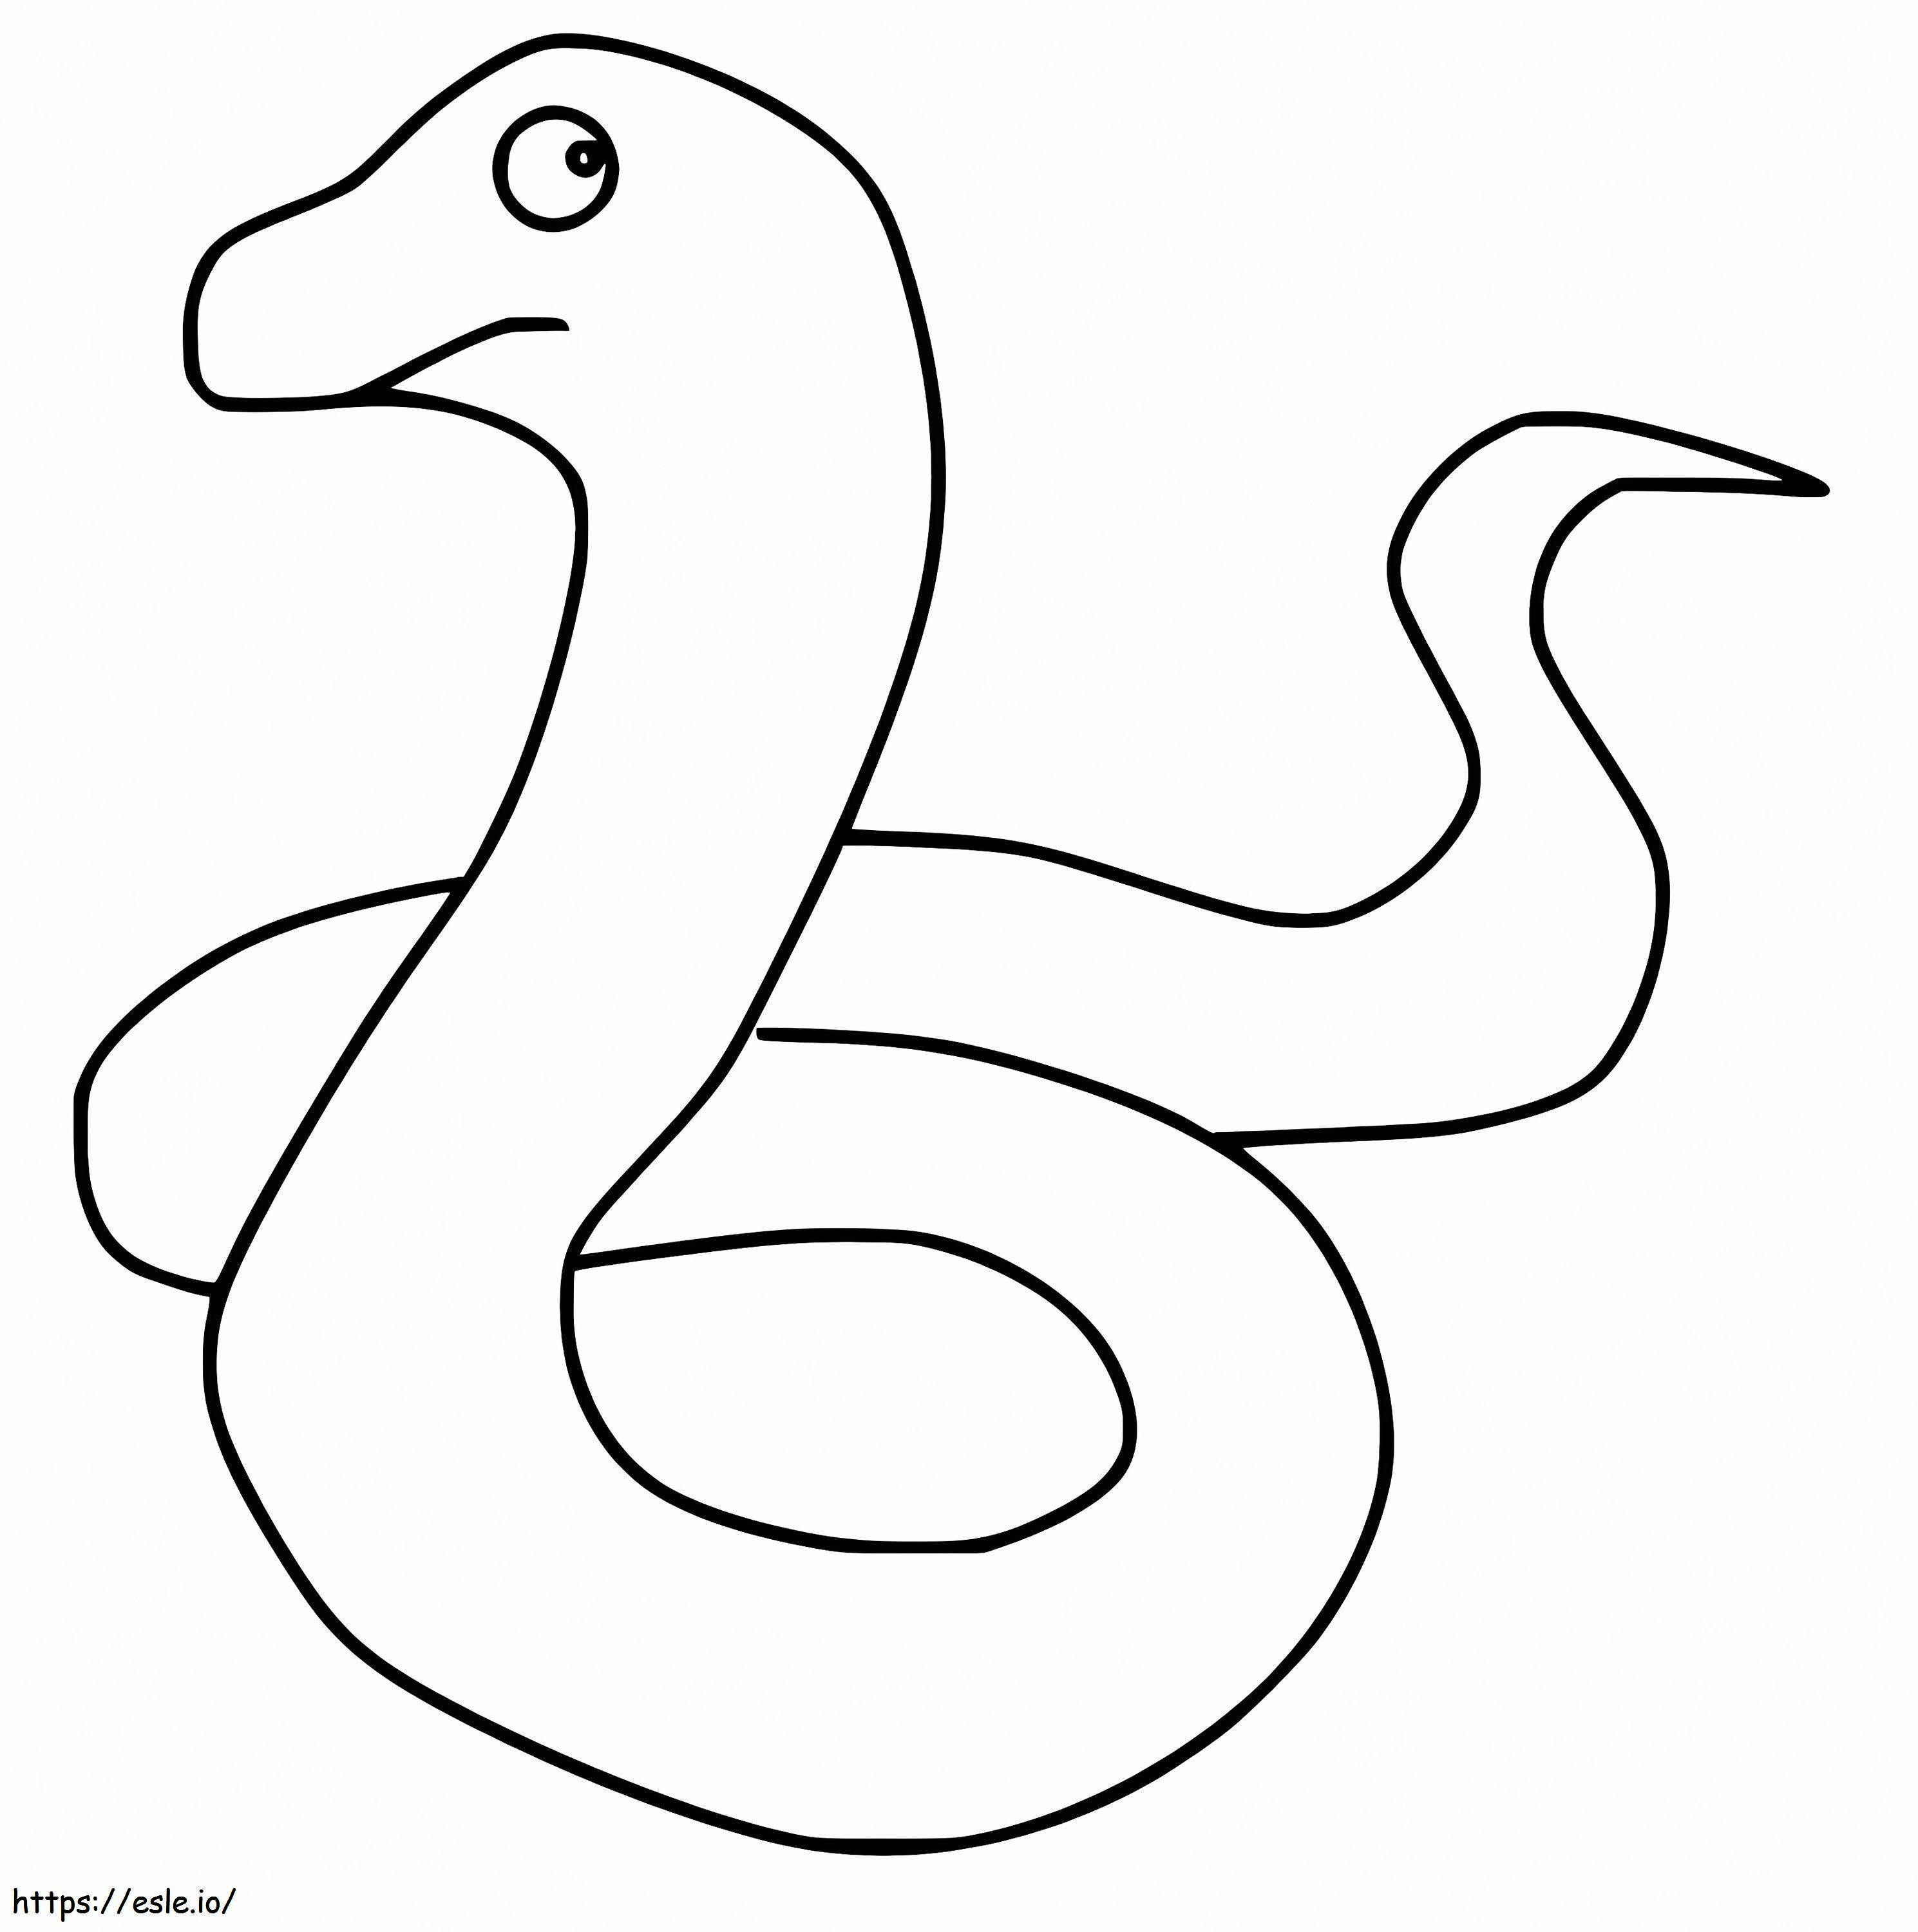 Snake From Gruffalo 1 coloring page